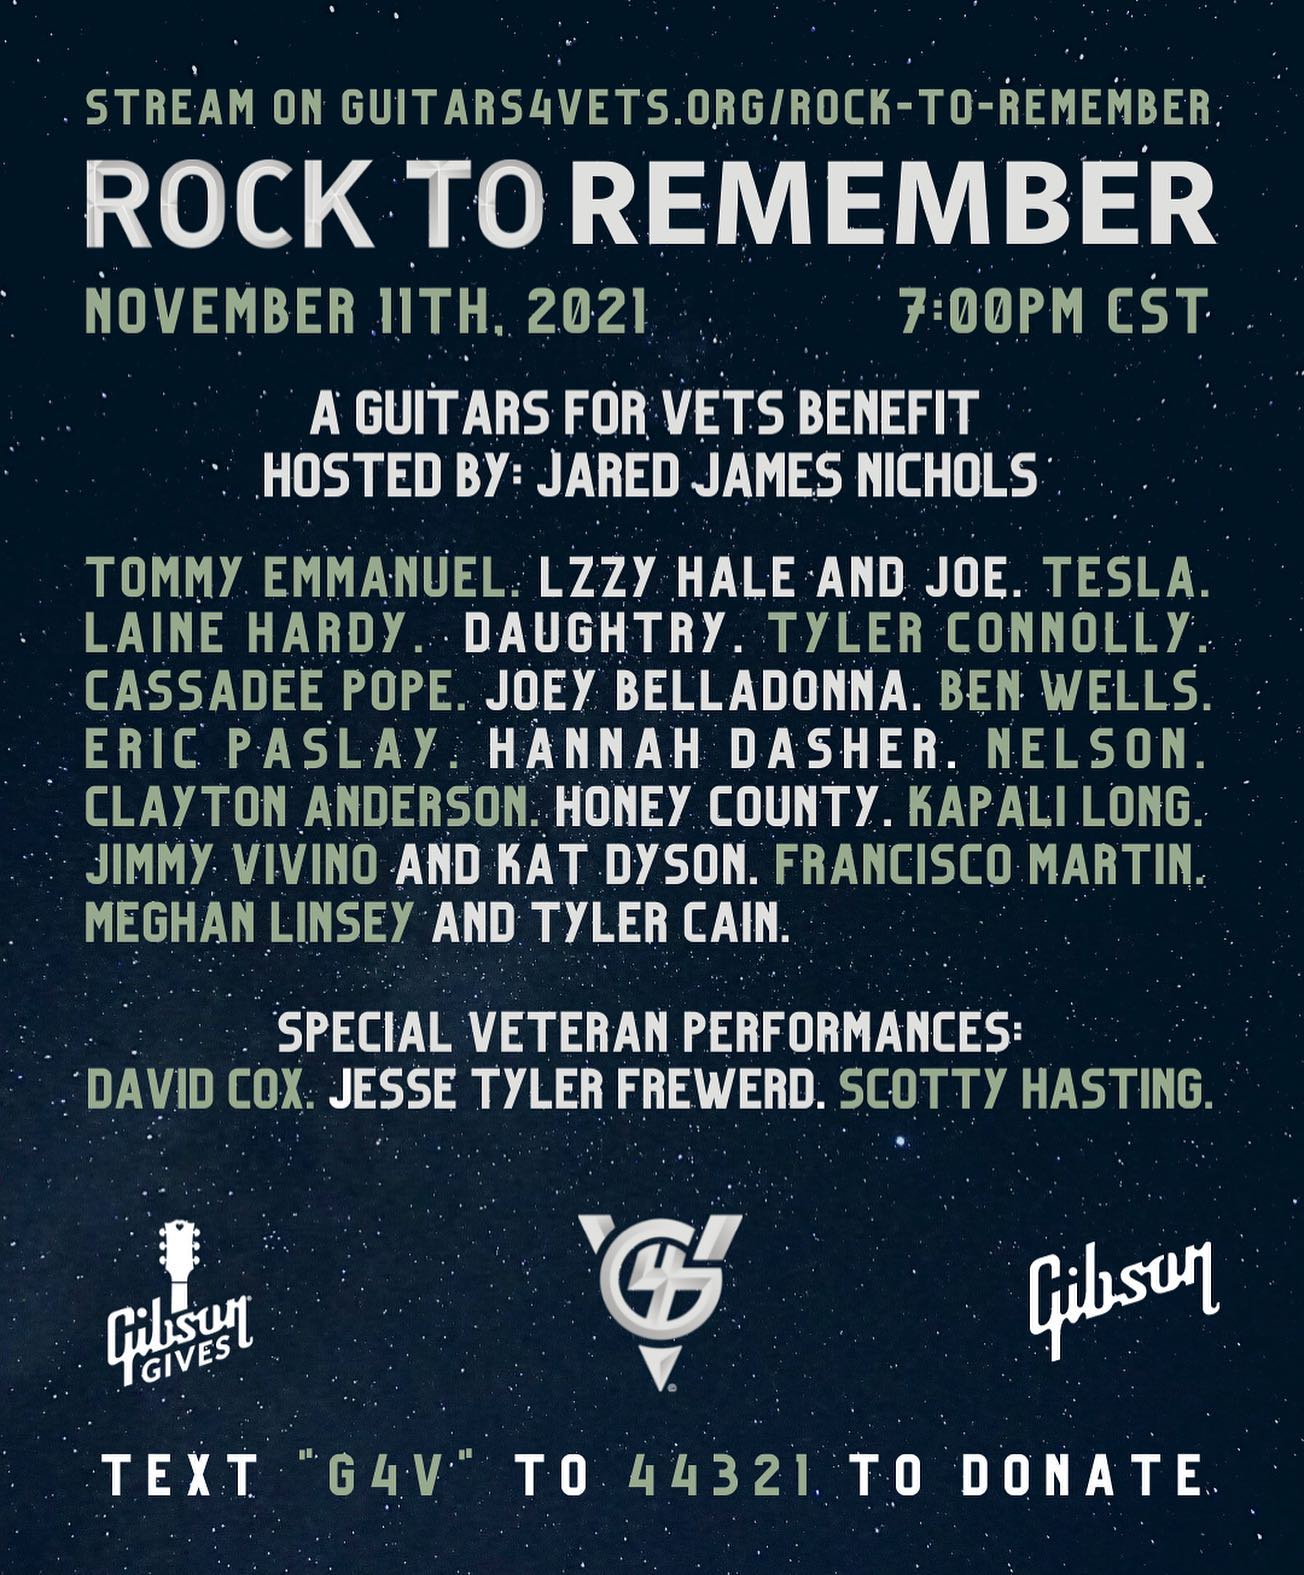 rock to remember, guitars for vets, gibson